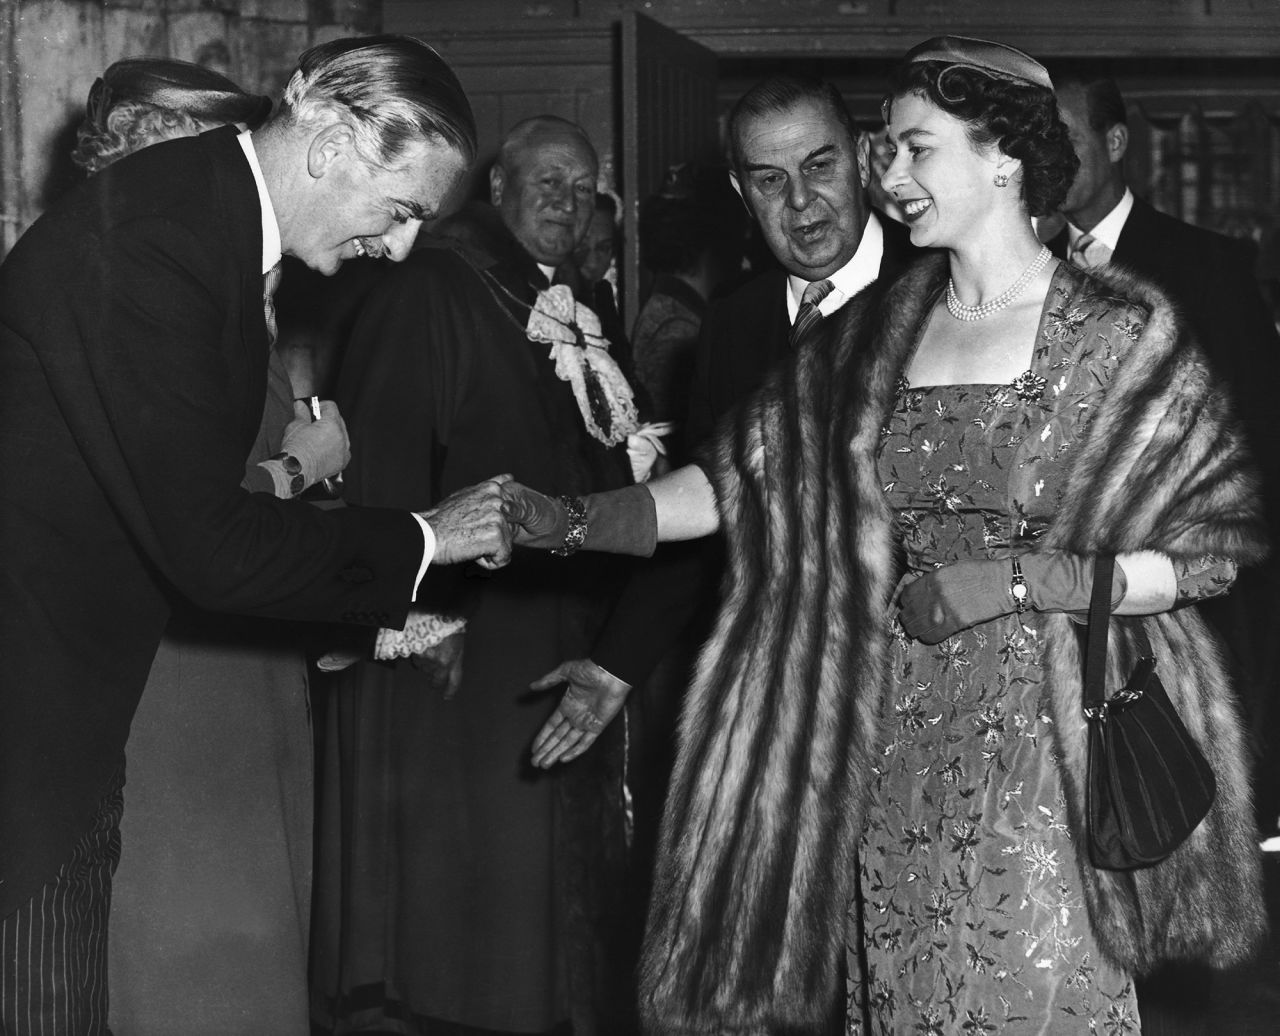 <strong>Anthony Eden (1955-1957):</strong> Her Majesty found her second prime minister to be a sympathetic listener and their relationship was one of constitutional propriety. The largest political event to occur during Eden's time was the Suez crisis. During this time, he believed it was of supreme importance to keep the Queen informed, so he shared all of the Suez papers with her — the first time she had ever been shown secret government documents.